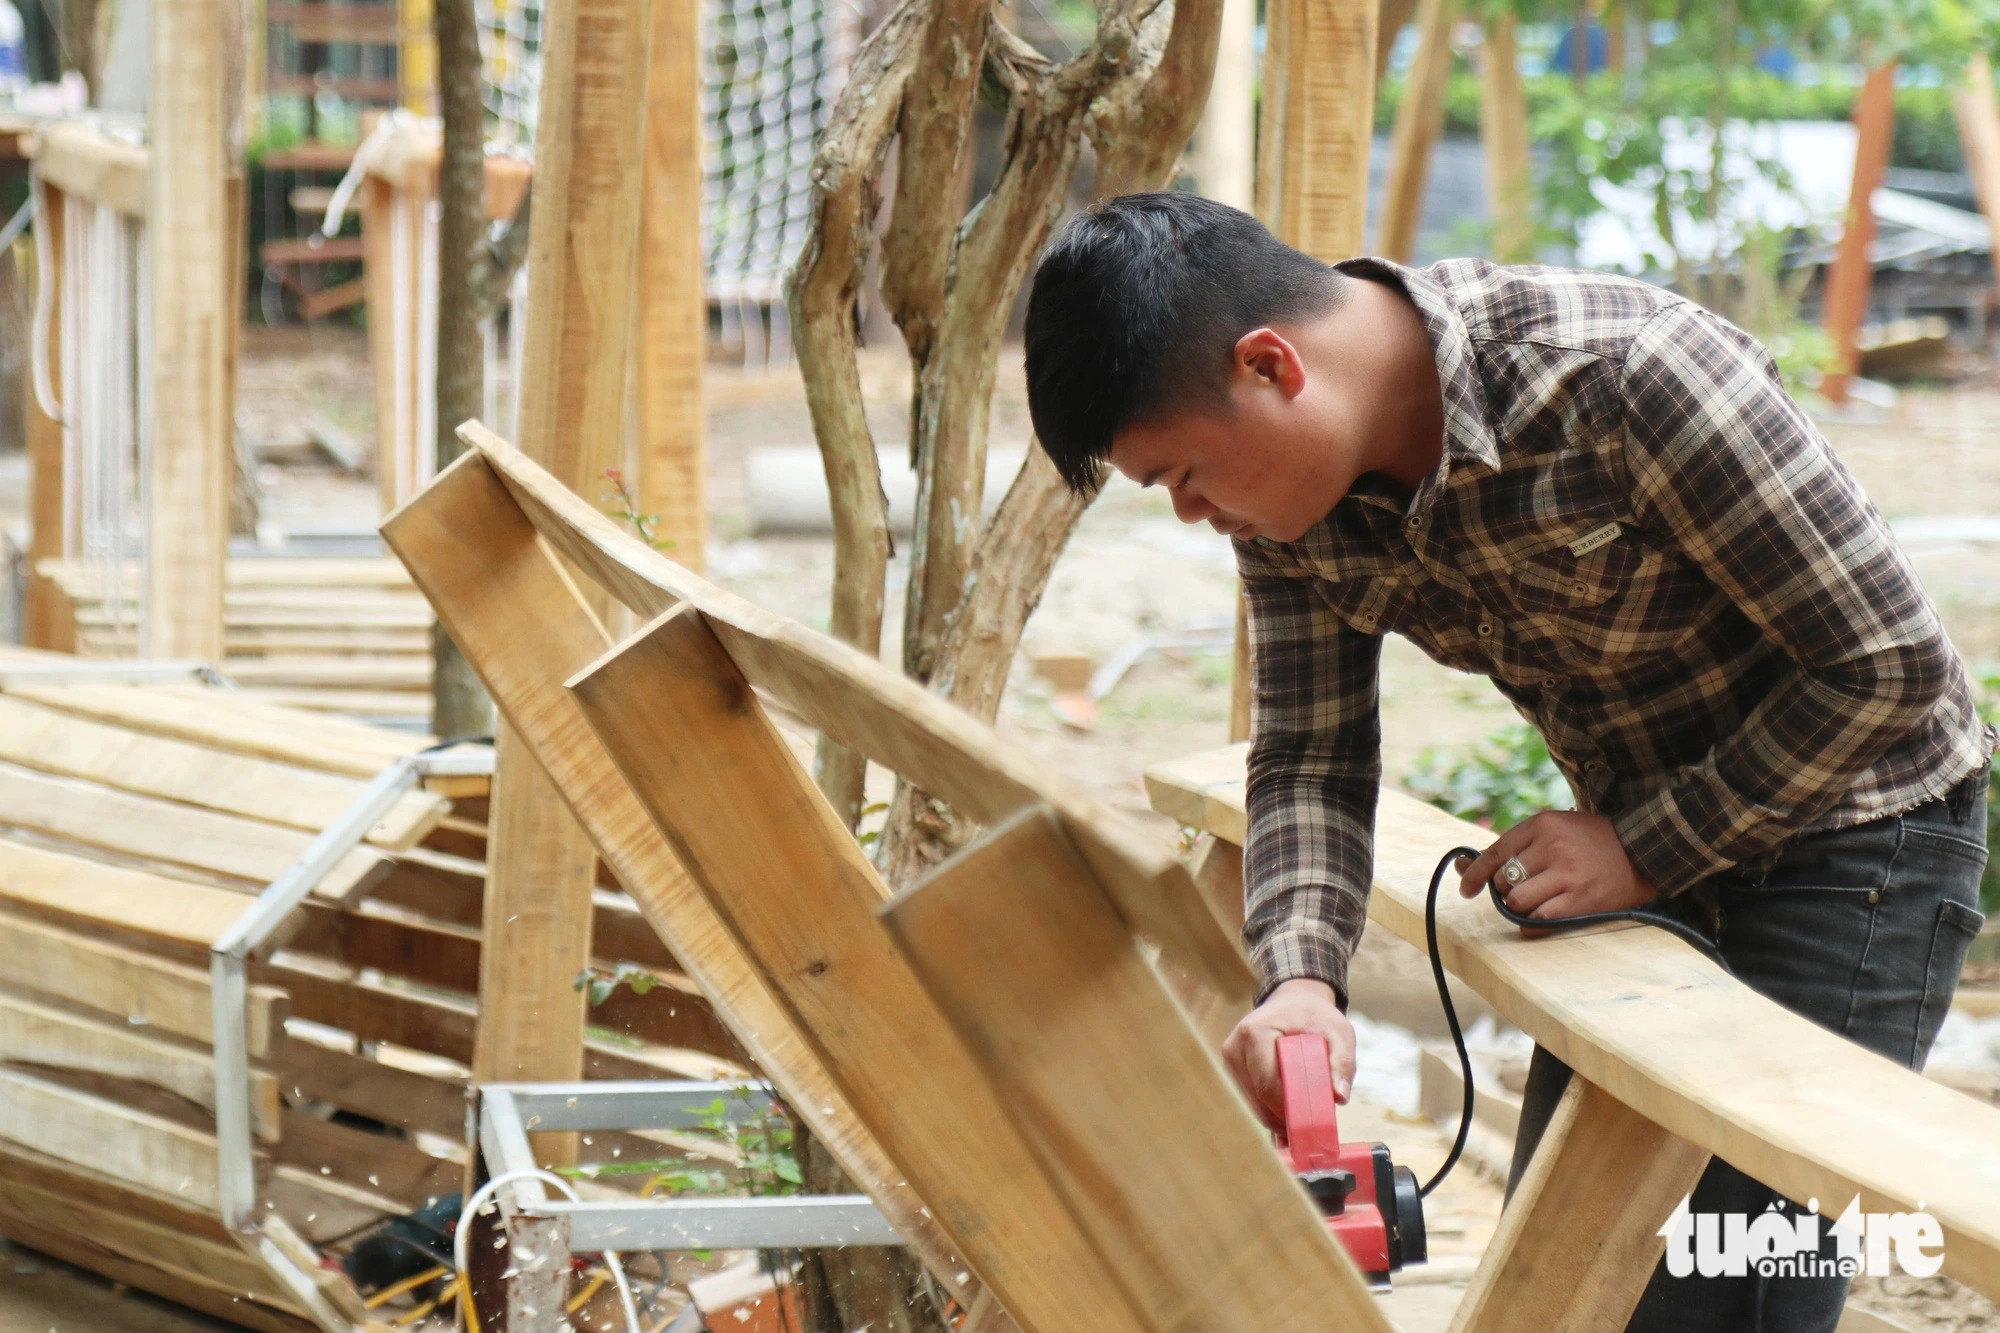 A woodworker is seen working at a new playground at the Vinh City park. Photo: Doan Hoa / Tuoi Tre